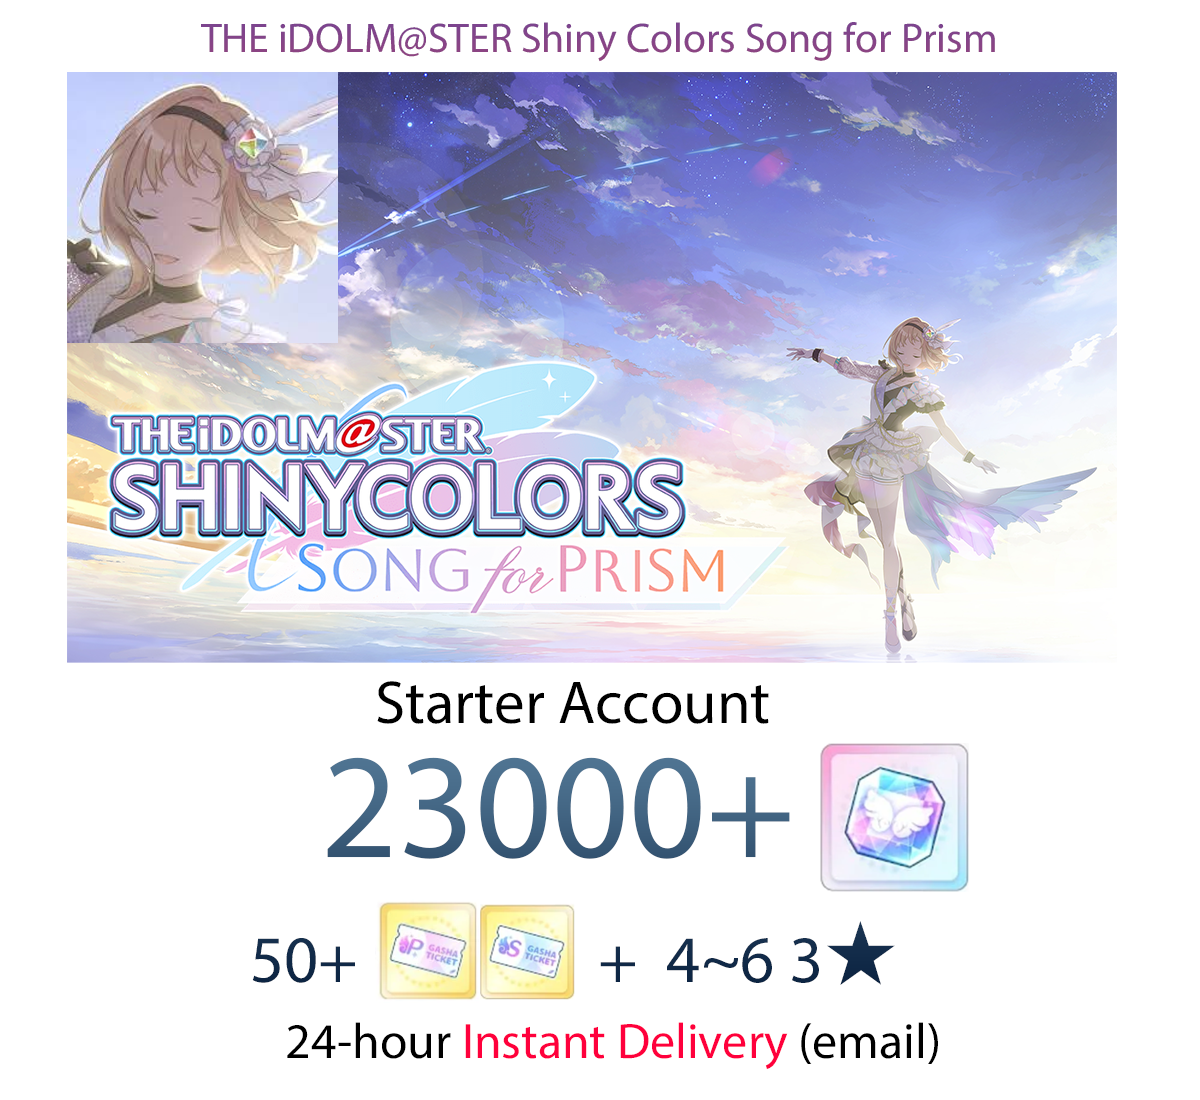 [JP] [INSTANT] 23000 Gems iDOLM@STER Shiny Colors Song for Prism Idolmaster Shanison Shinymas Starter Account-Mobile Games Starter